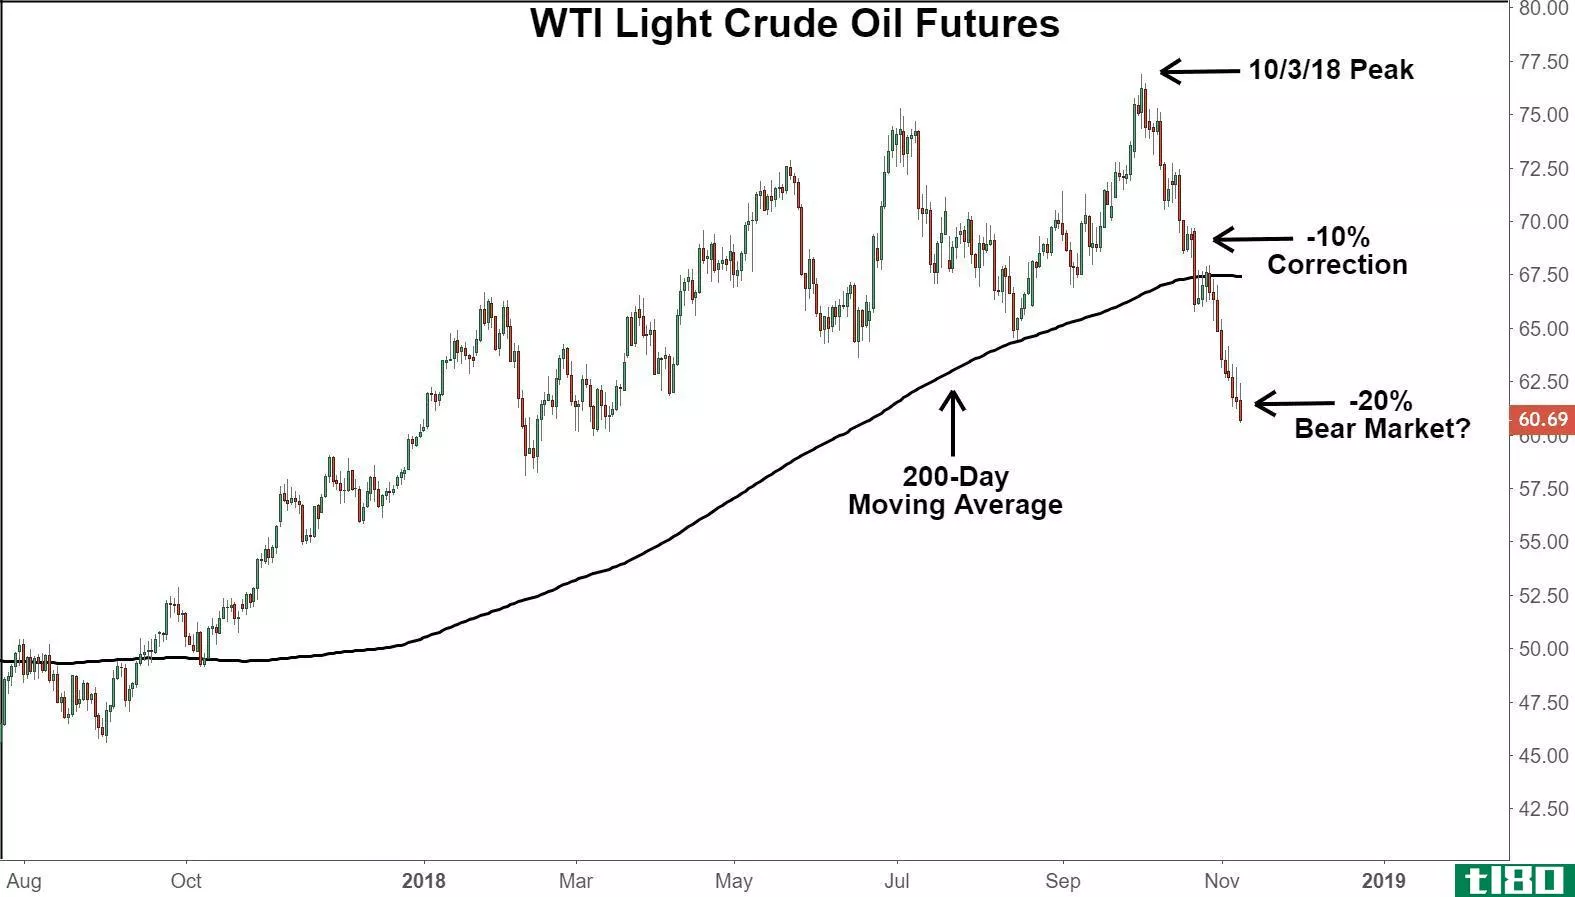 Chart showing the performance of WTI Light Crude Oil Futures prices